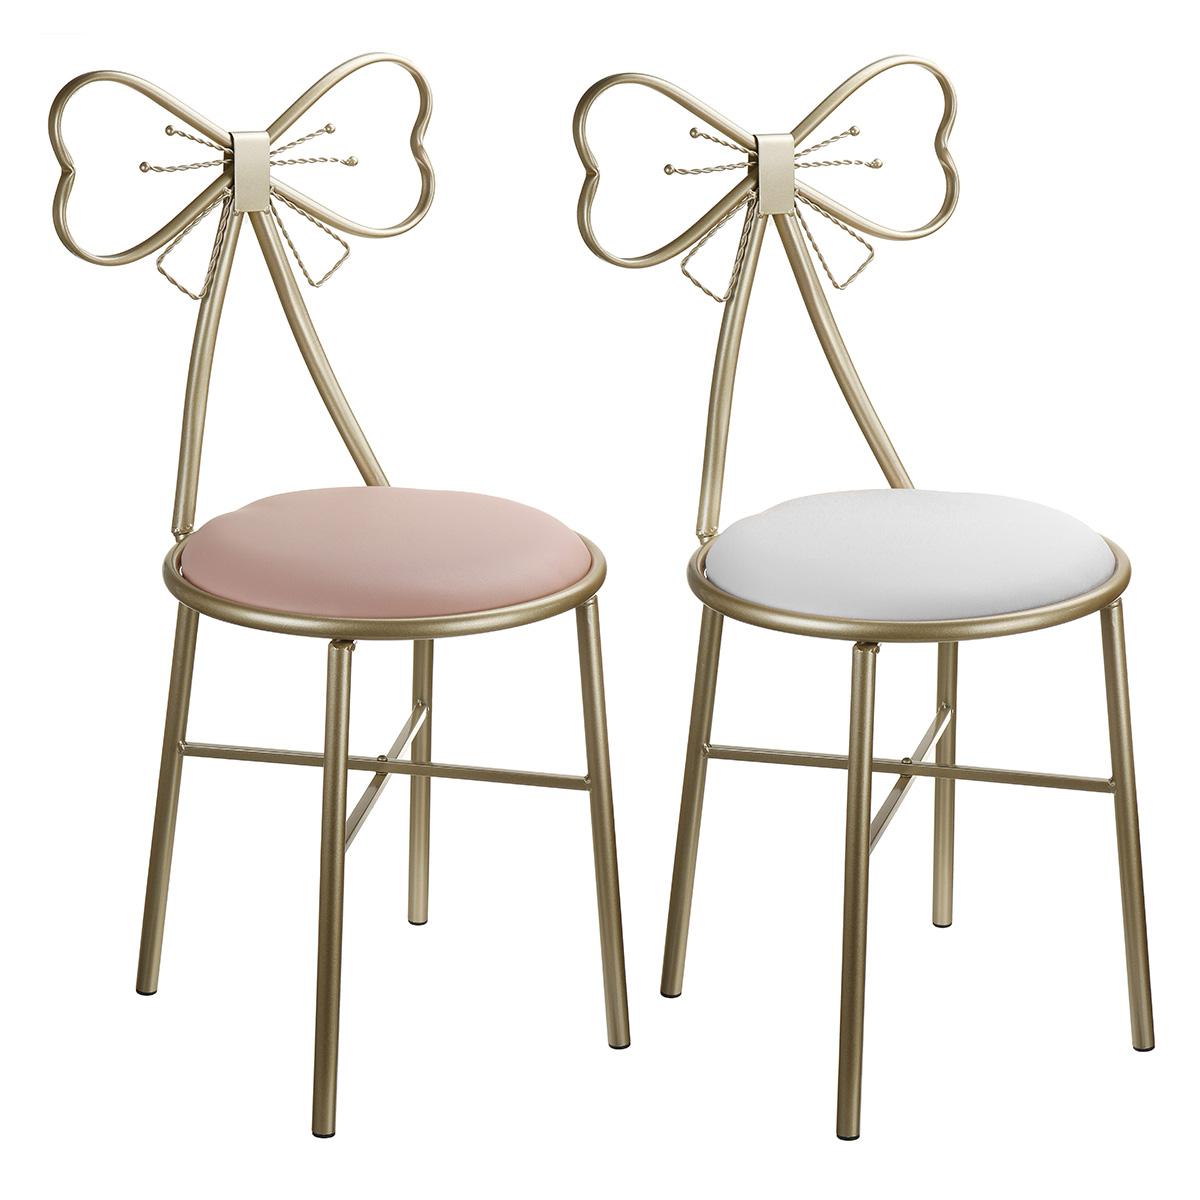 Vanity Stool Butterfly Backrest Wrought Iron PU Leather Makeup Stool Chair Super Soft Princess Dressing Stool Chair for Living Room